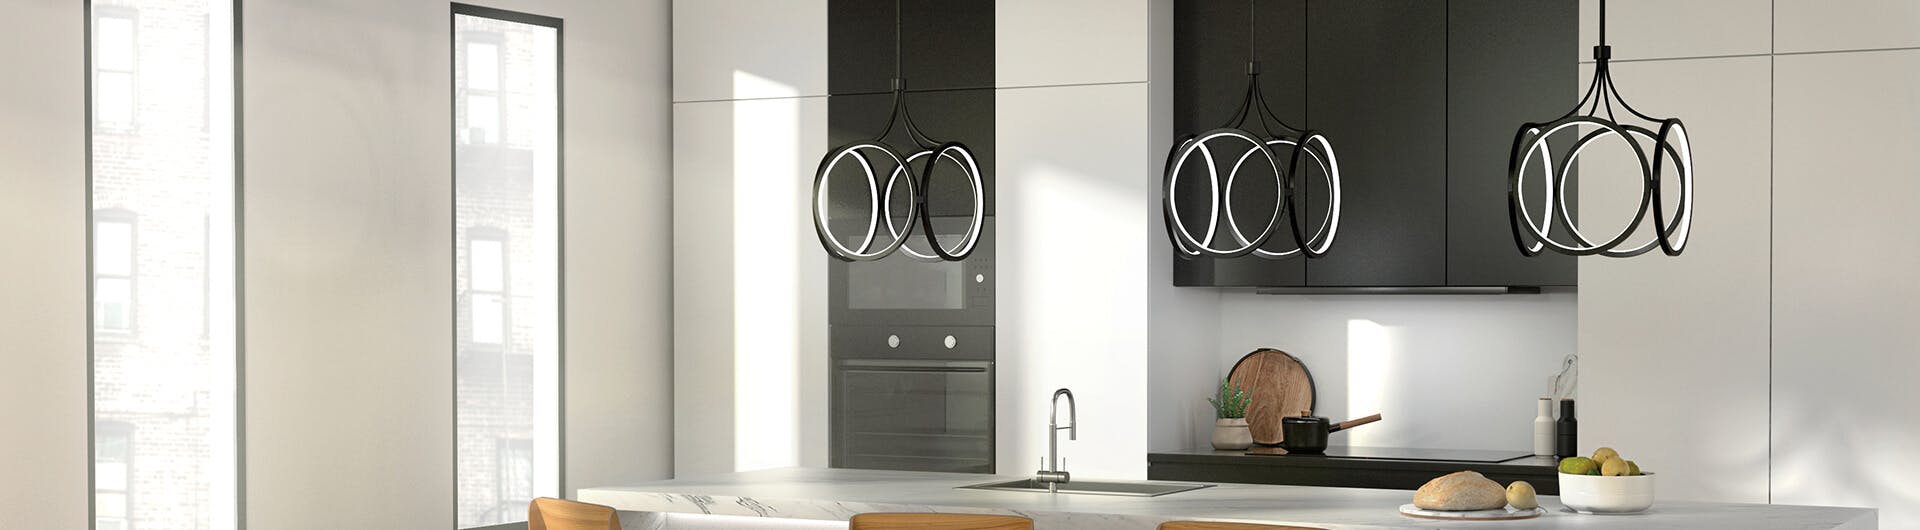 Kitchen in a high rise with three black finish ciri pendant lights hanging over a kitchen island